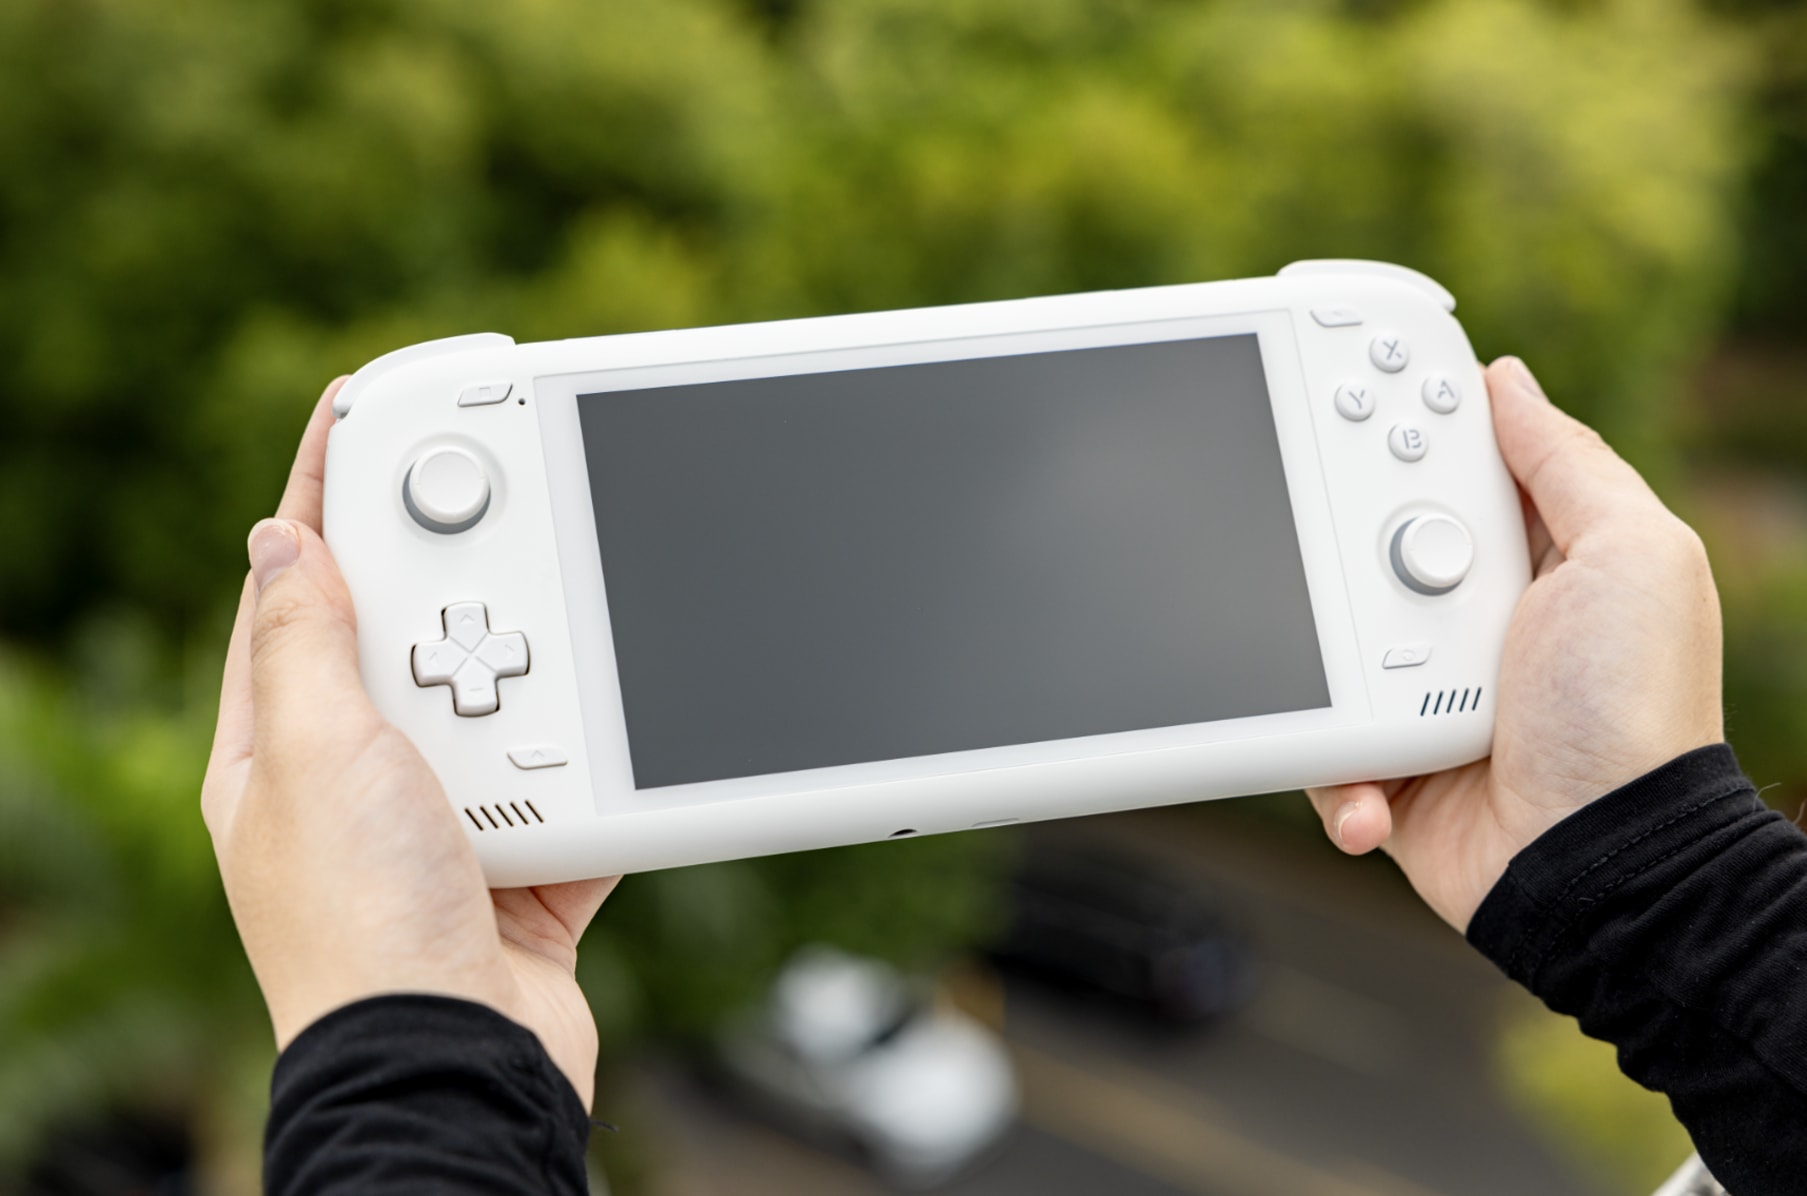 Odin 2 Android Handheld Crowdfunding Kicks Off Next Week - Droid Gamers